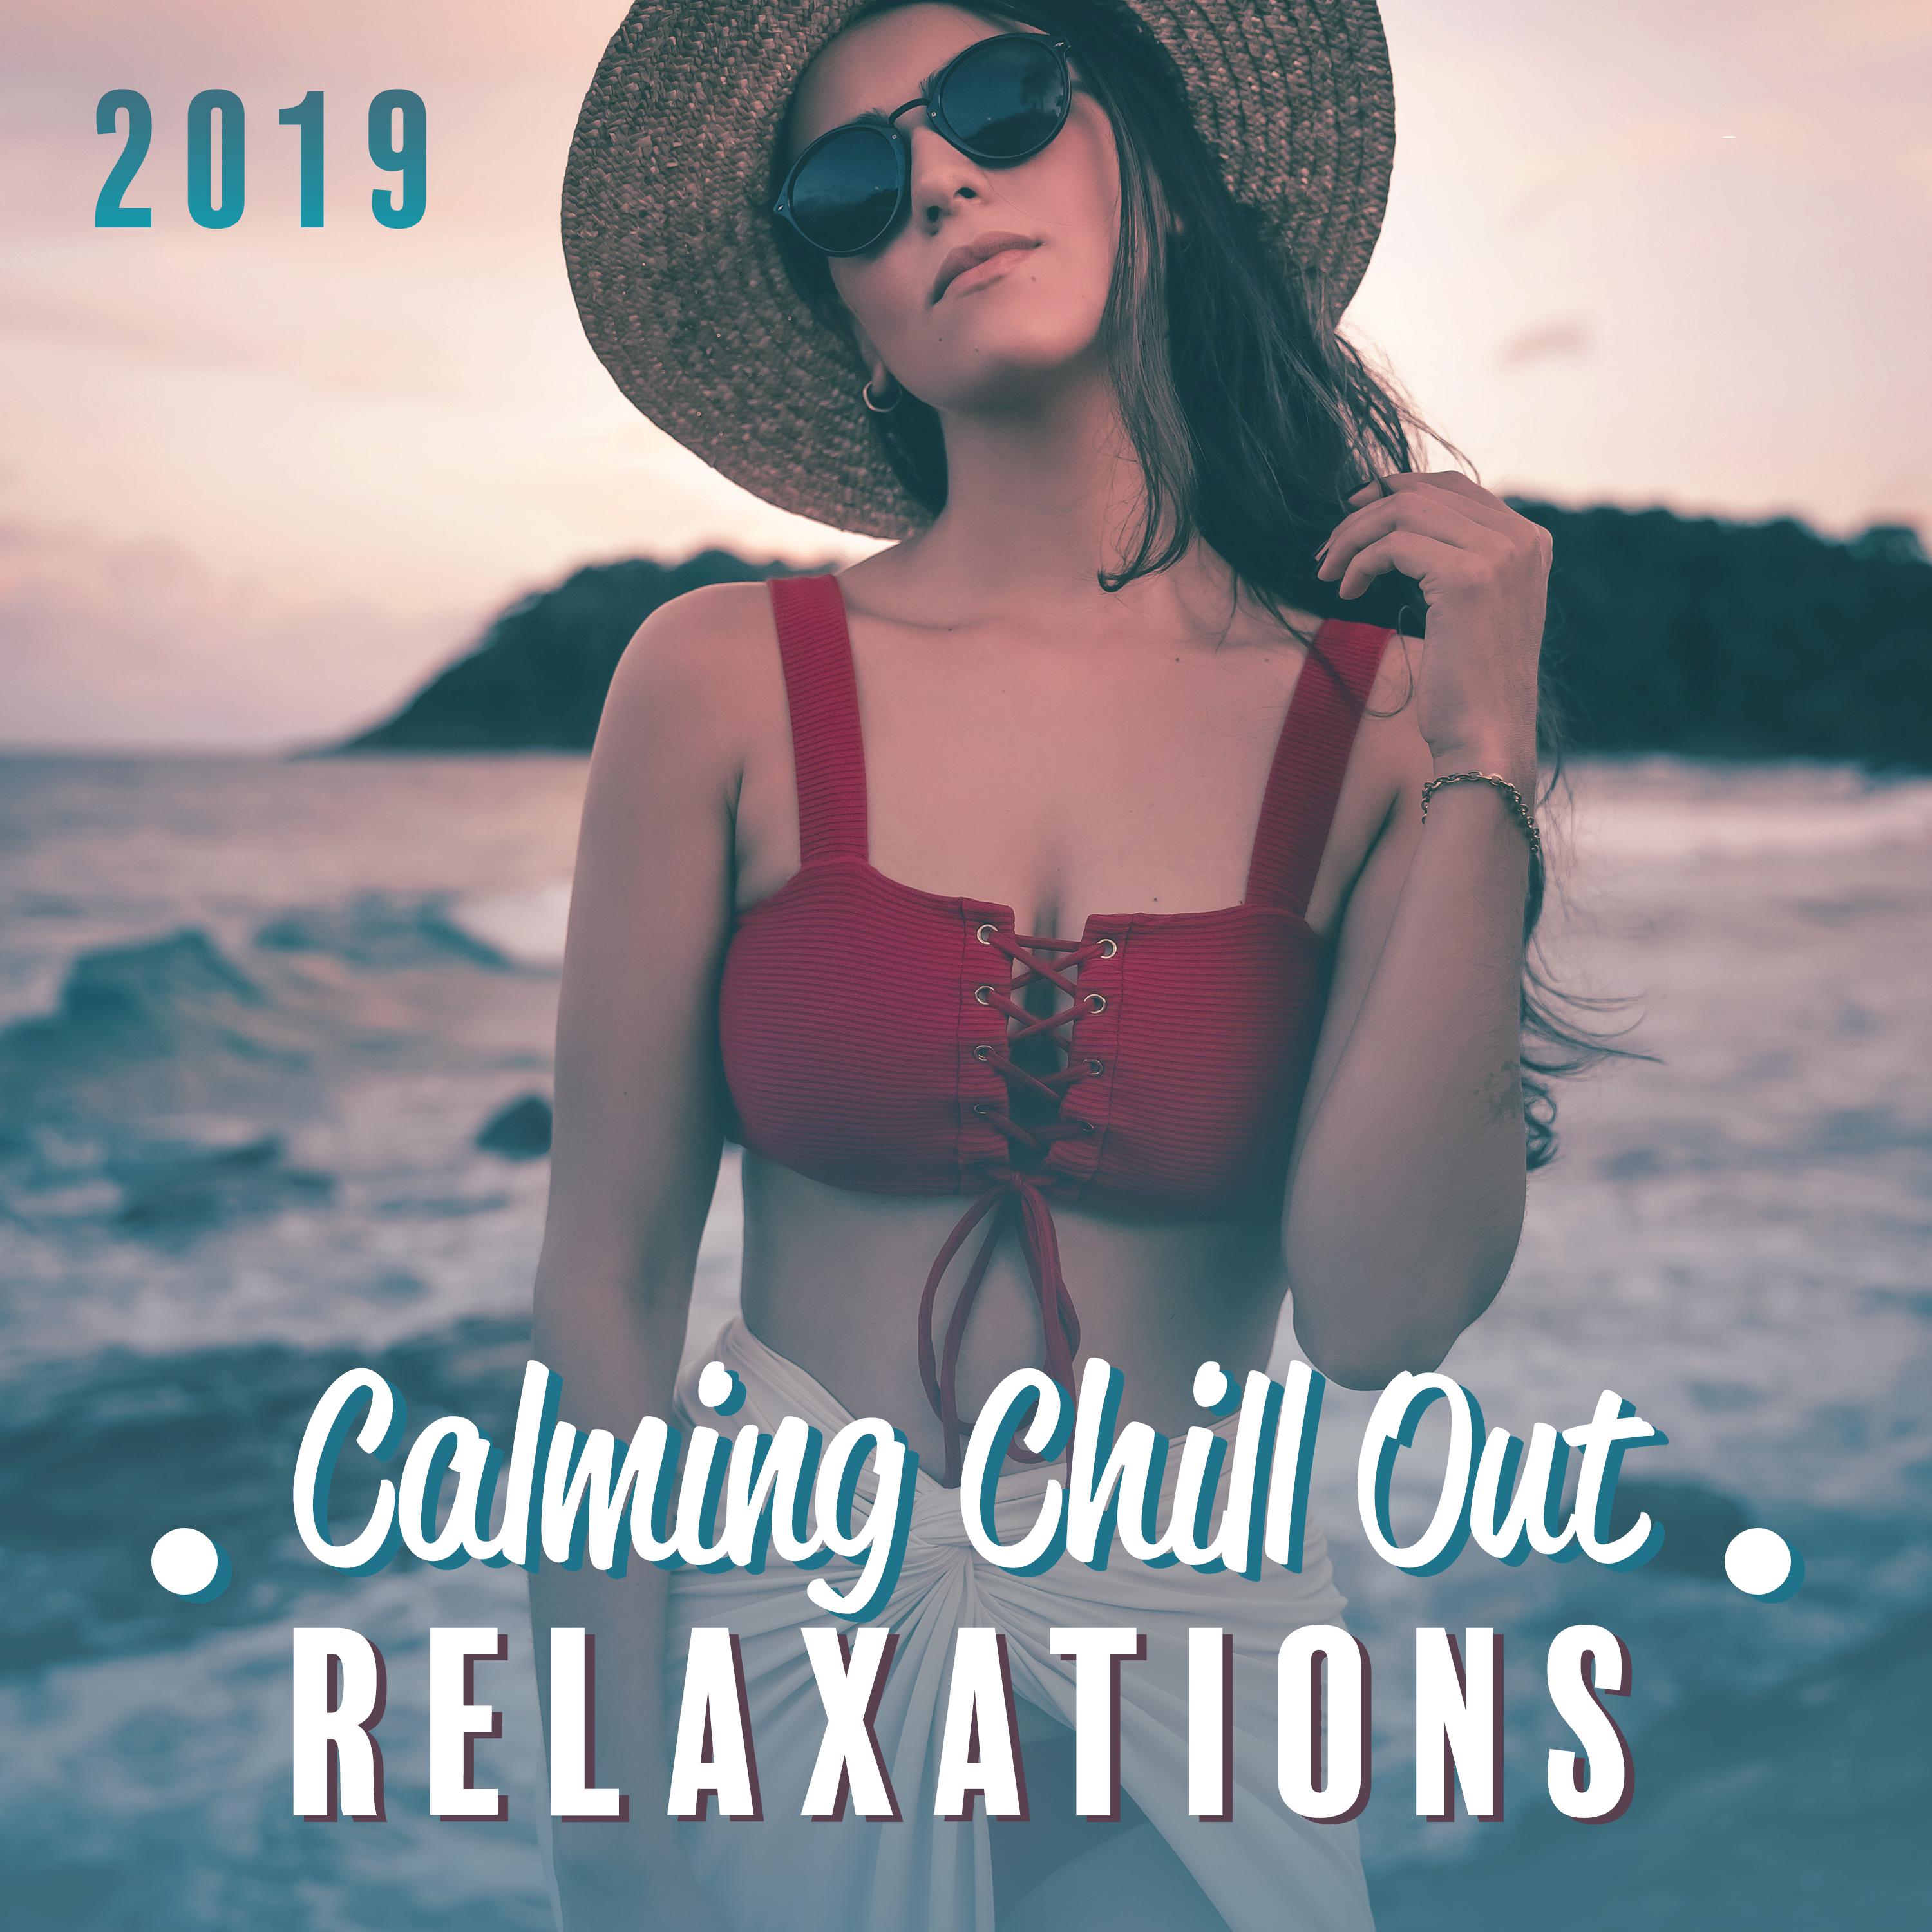 2019 Calming Chill Out Relaxations – Ambient Music for Relax & Rest, Summer Chill Out, Music Therapy, Ibiza Lounge, Zen, Beach Music